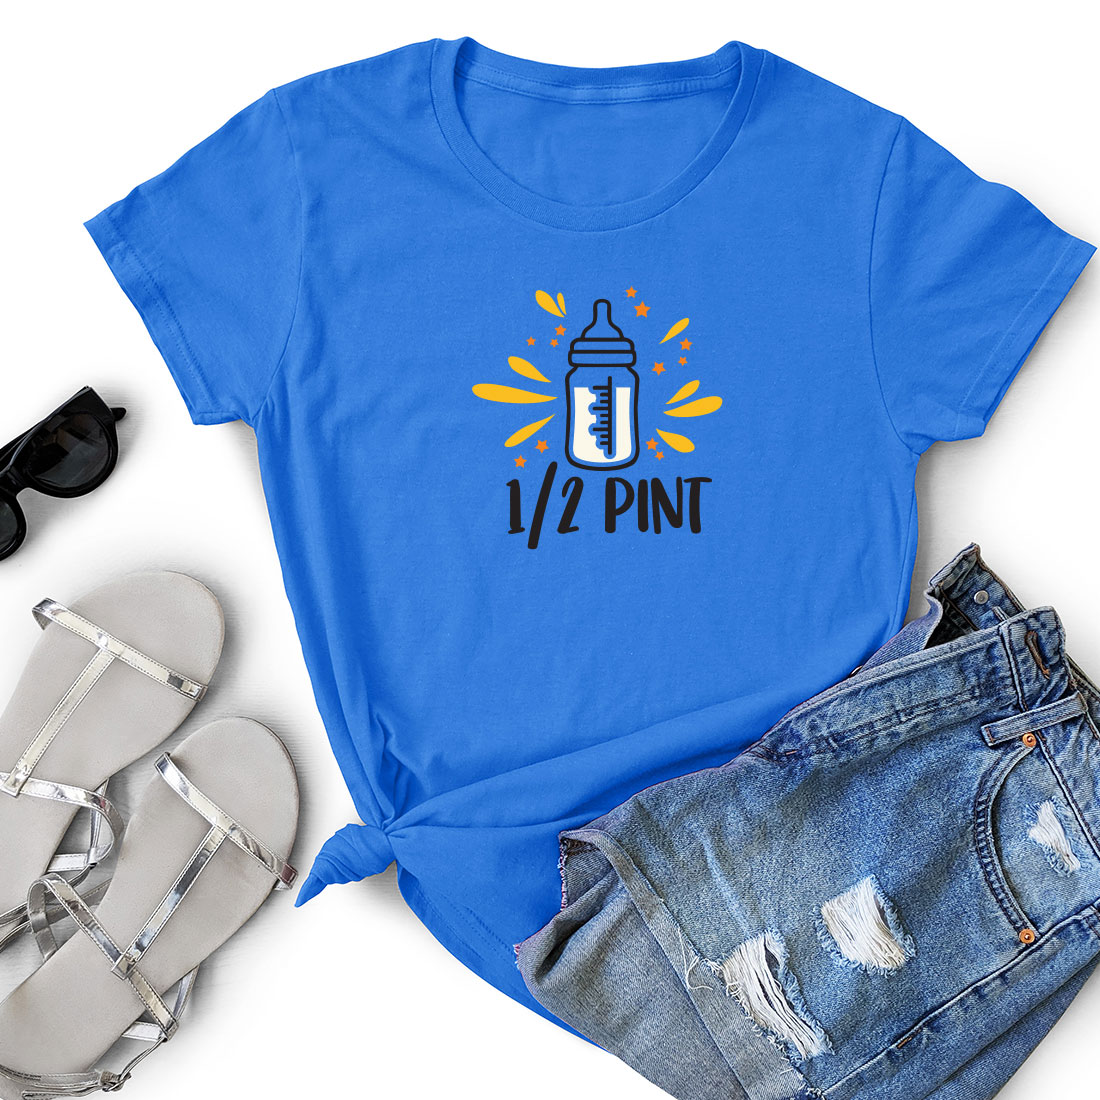 T - shirt that says 12 / 2 pint next to a pair of.